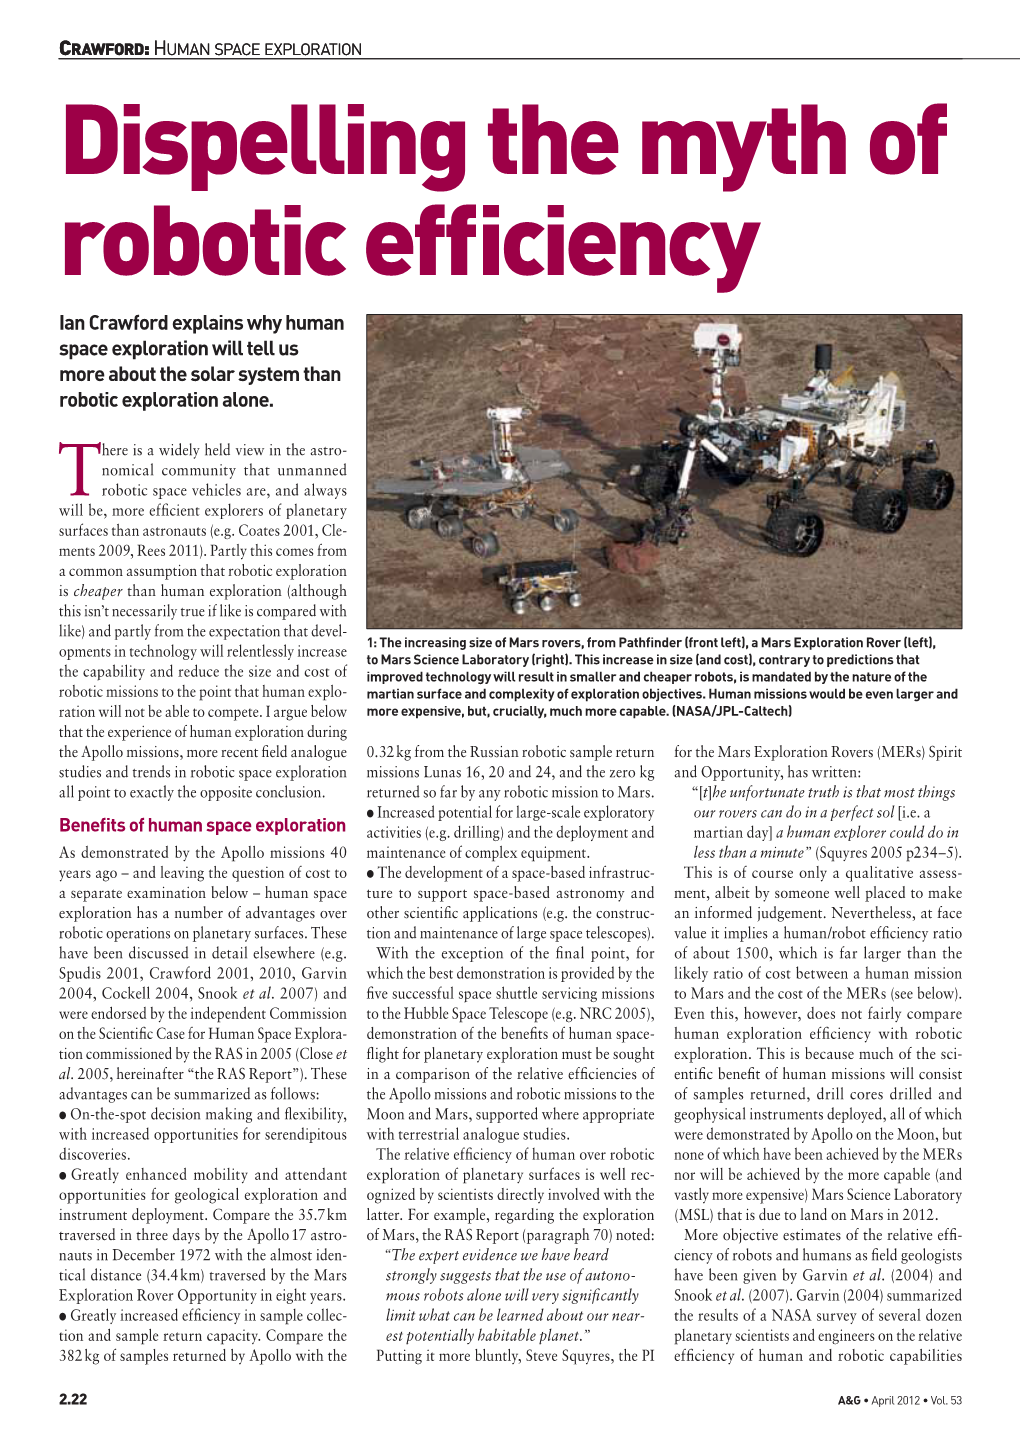 Dispelling the Myth of Robotic Efficiency: Why Human Space